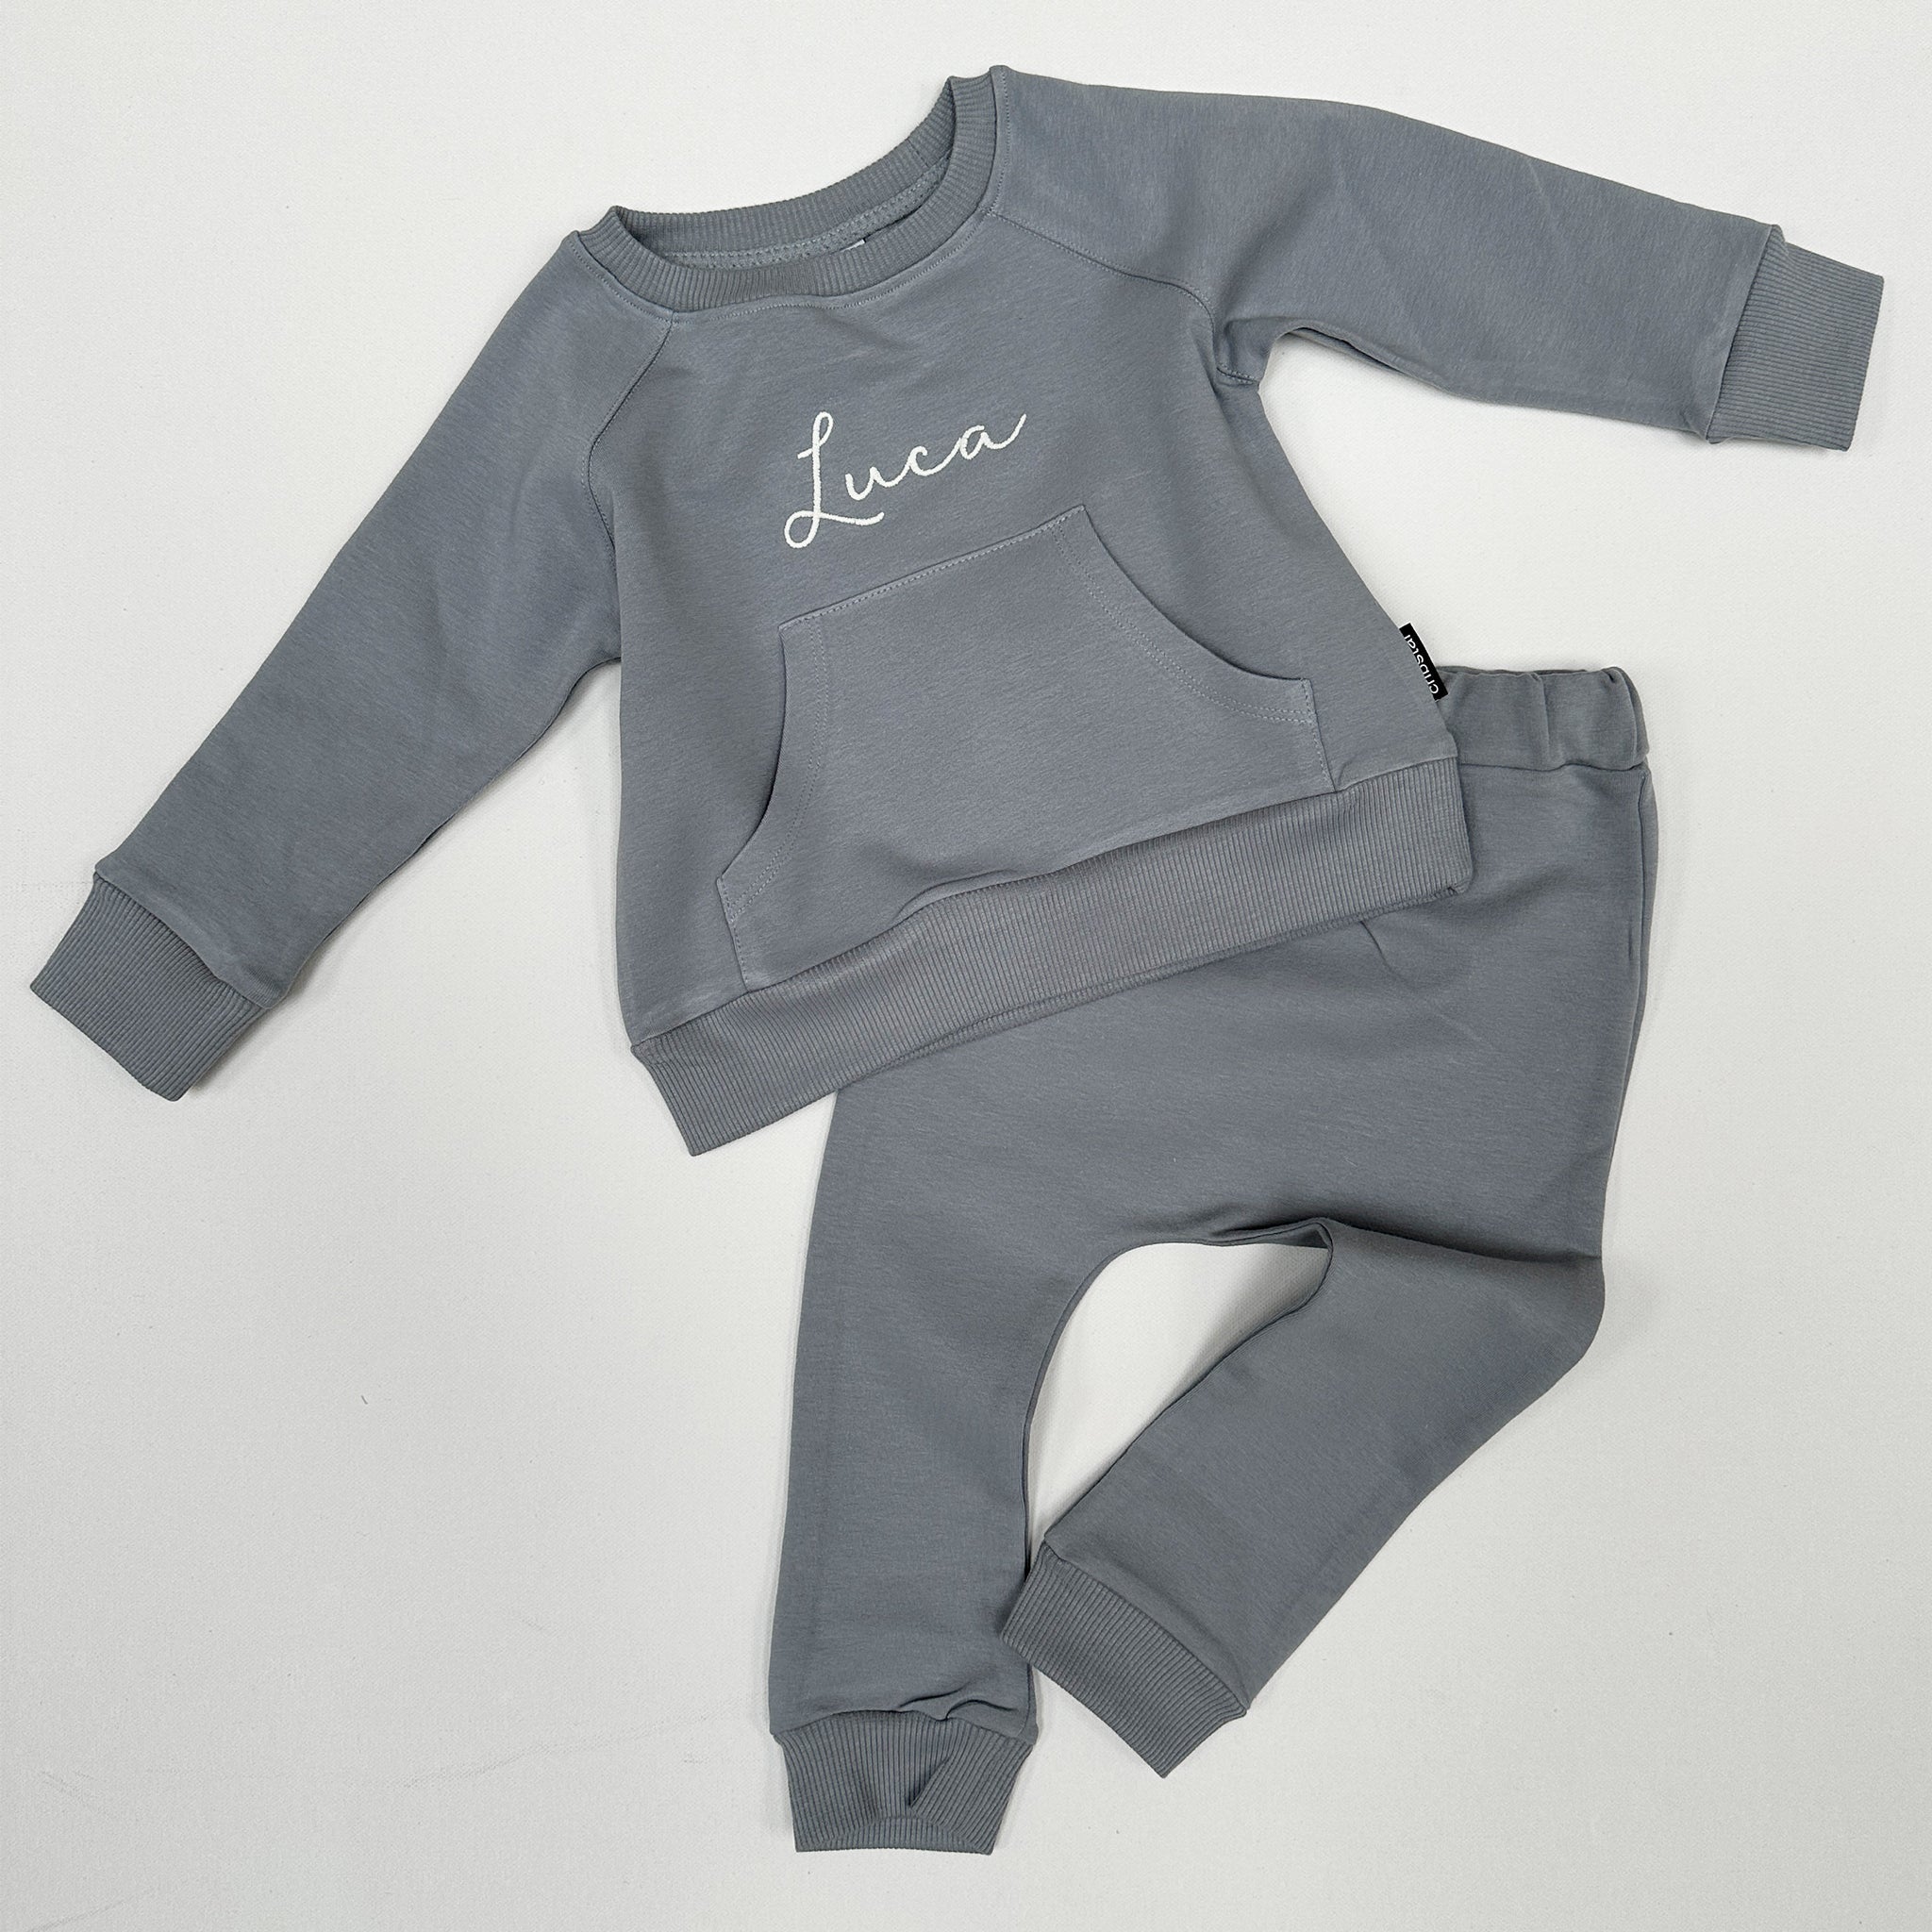 SPECIAL BUY - Personalised Tracksuit - Pebbles